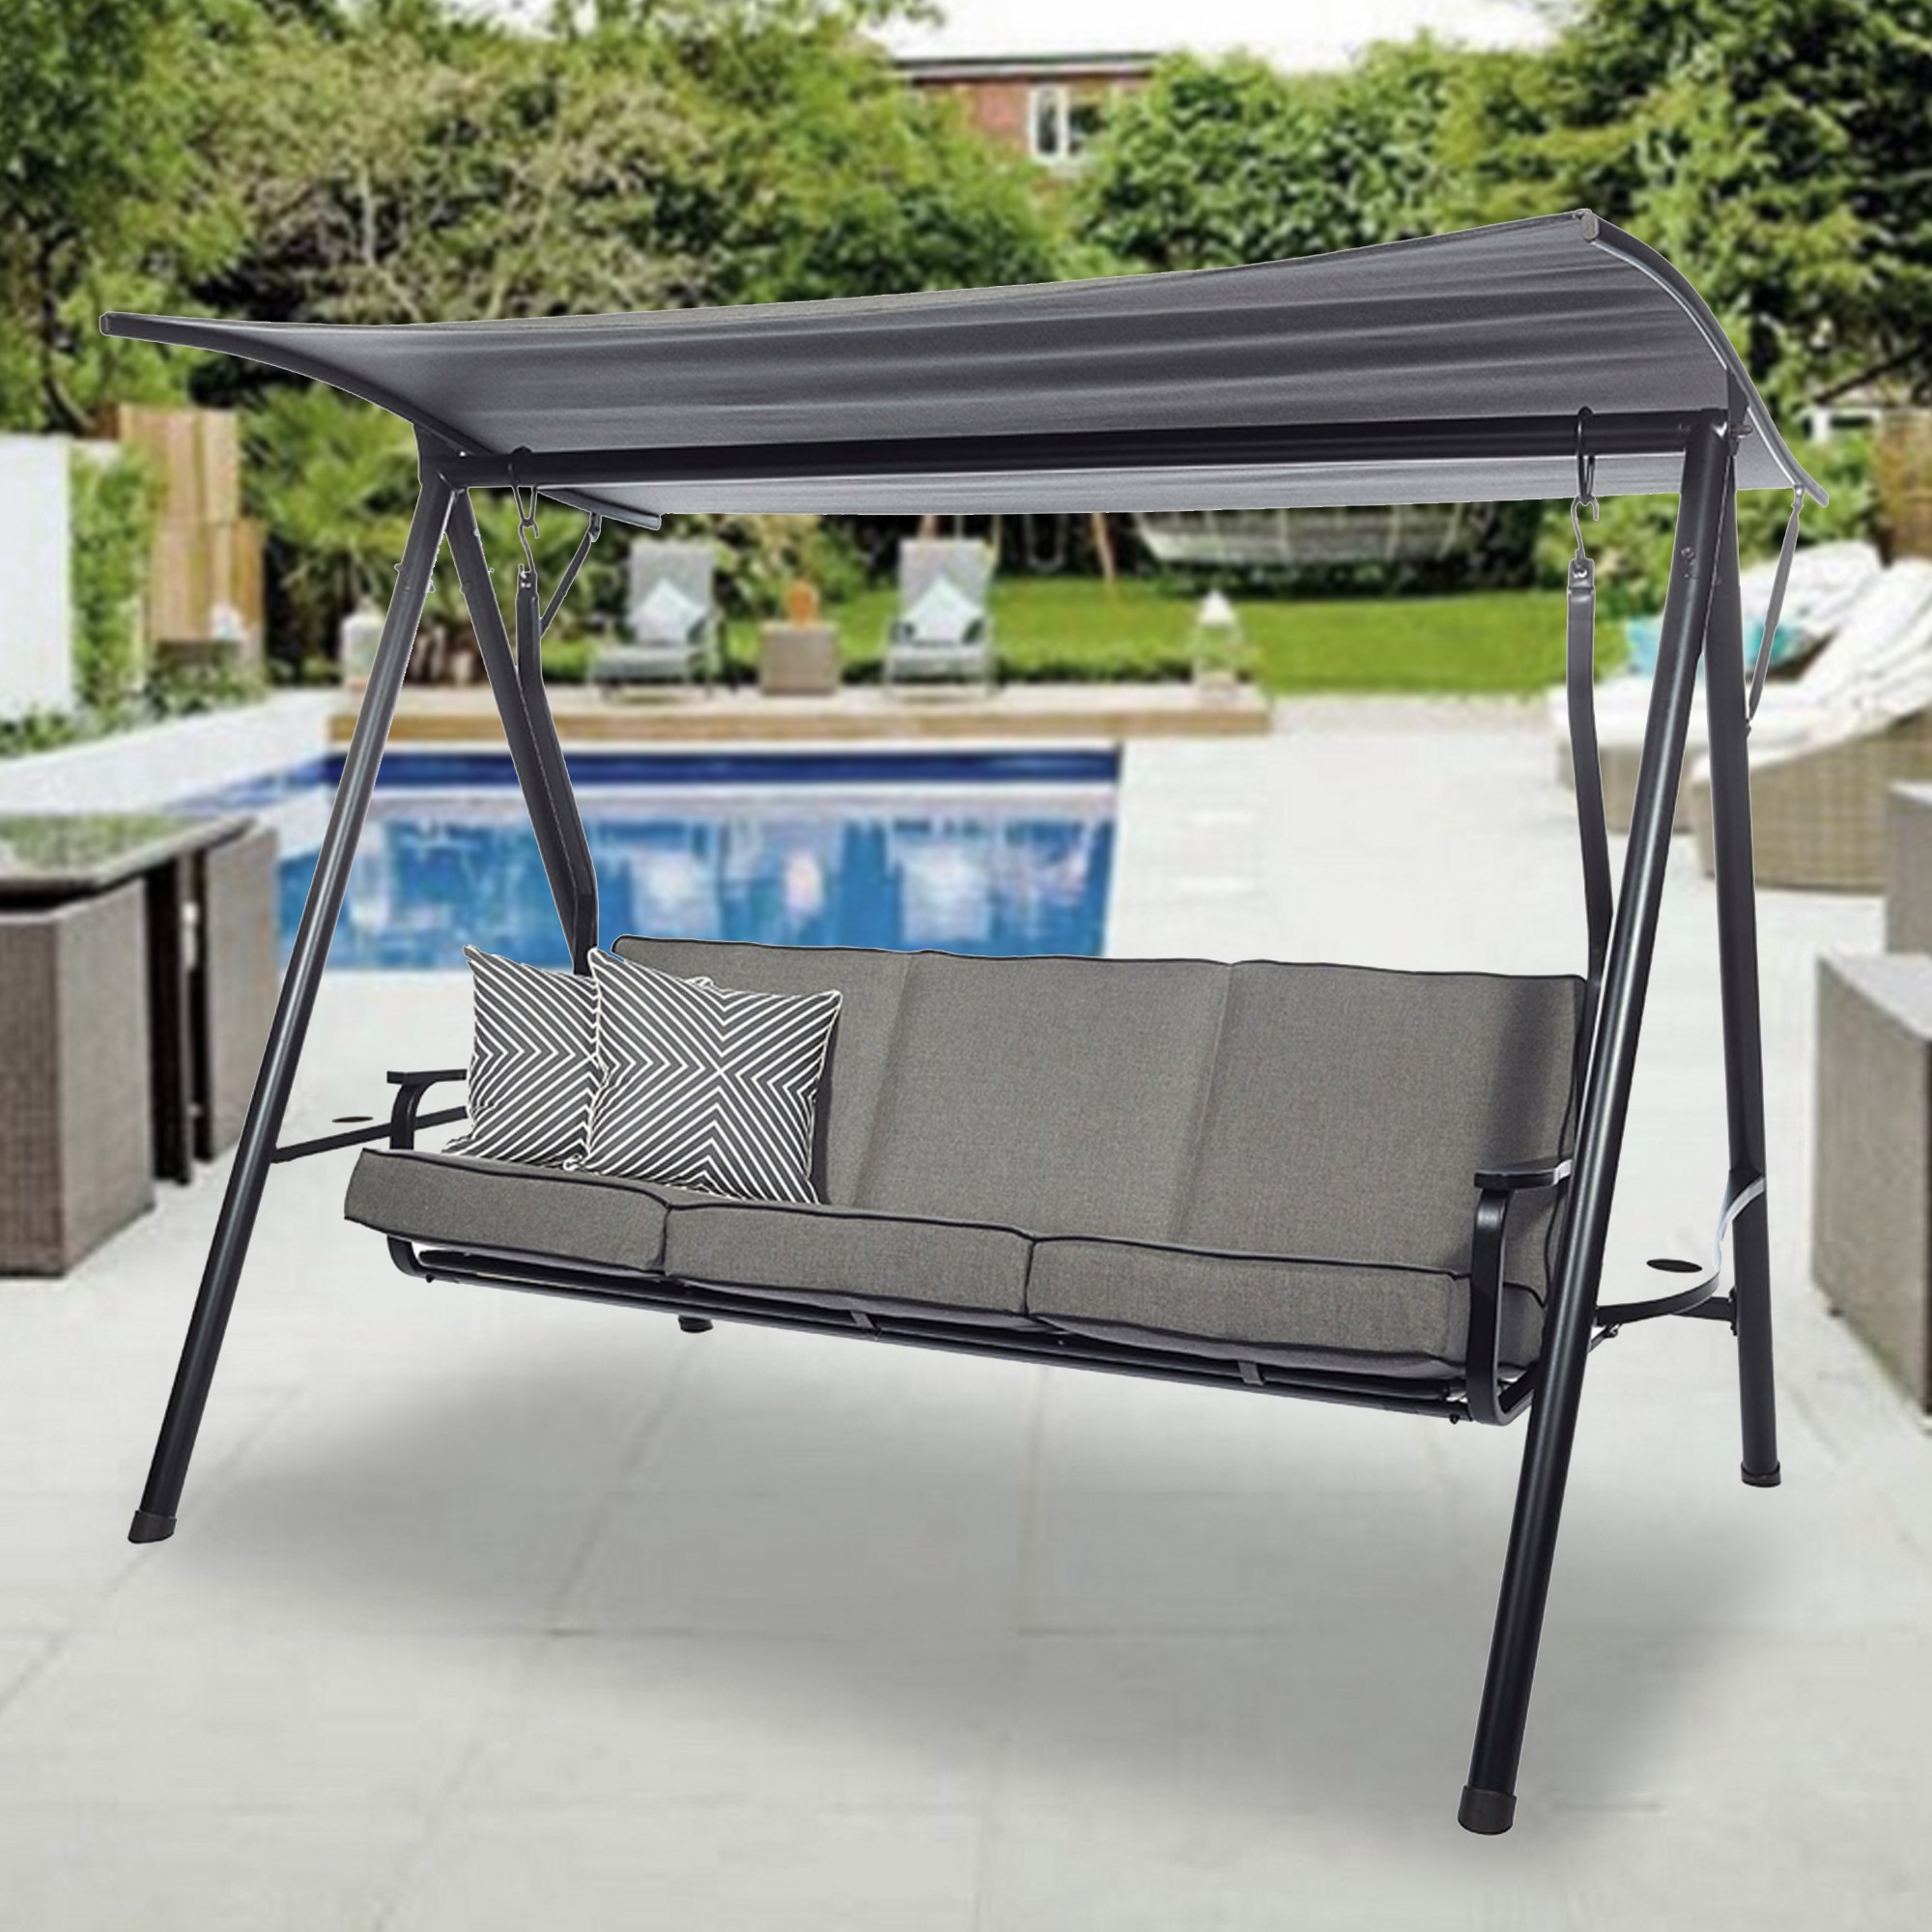 Replacement Canopy For Daybed Swing, Outdoor Swing Canopy Replacement Canada